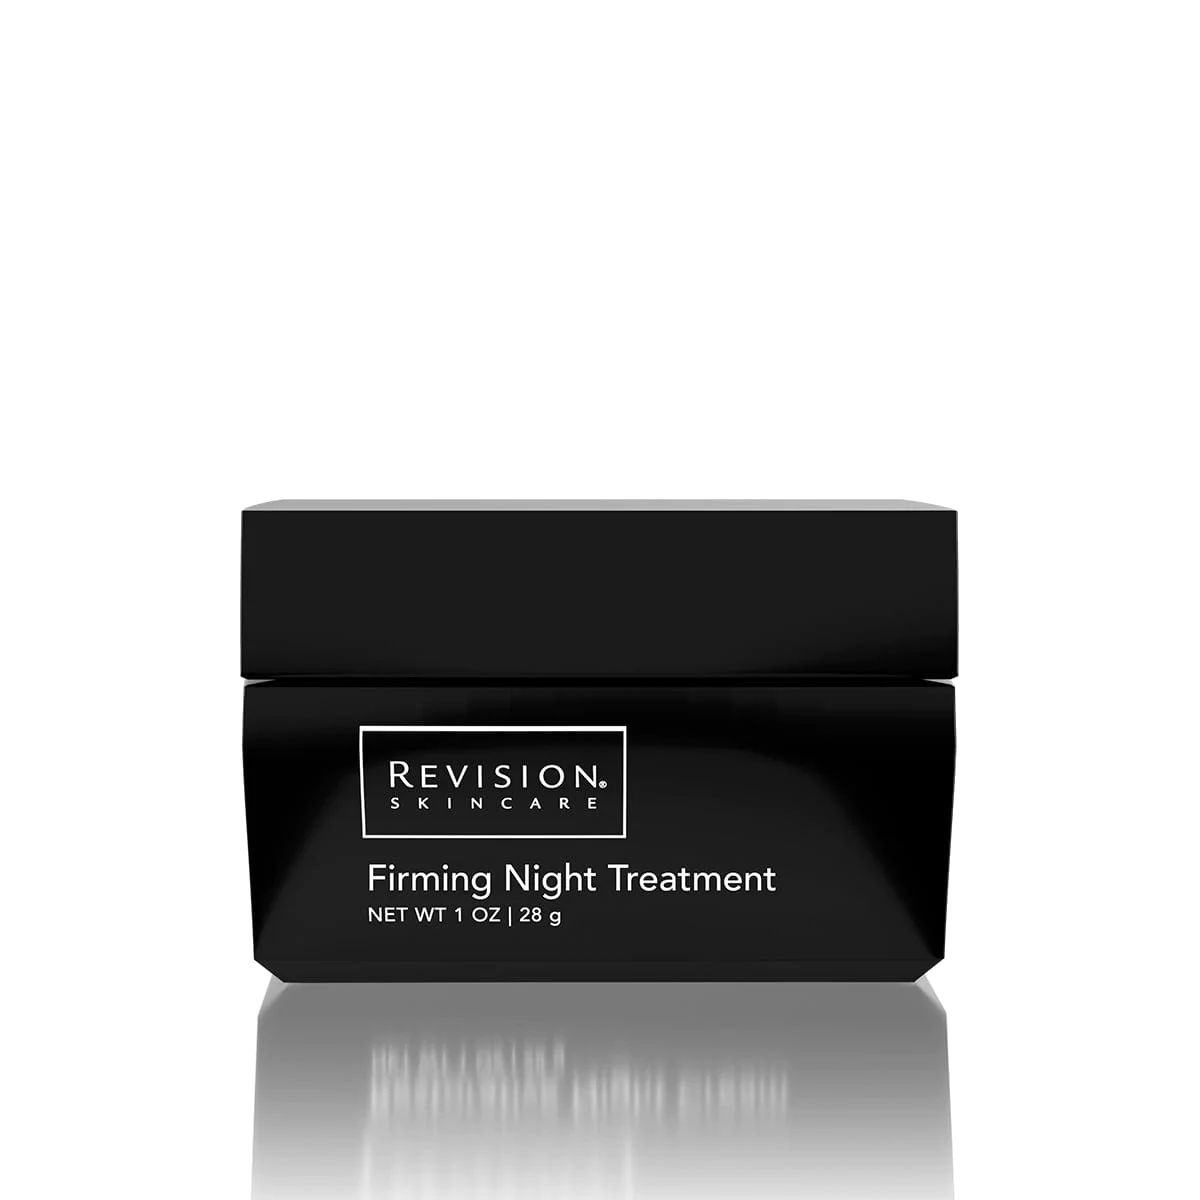 Firming Night Treatment 1 oz | Revision skincare